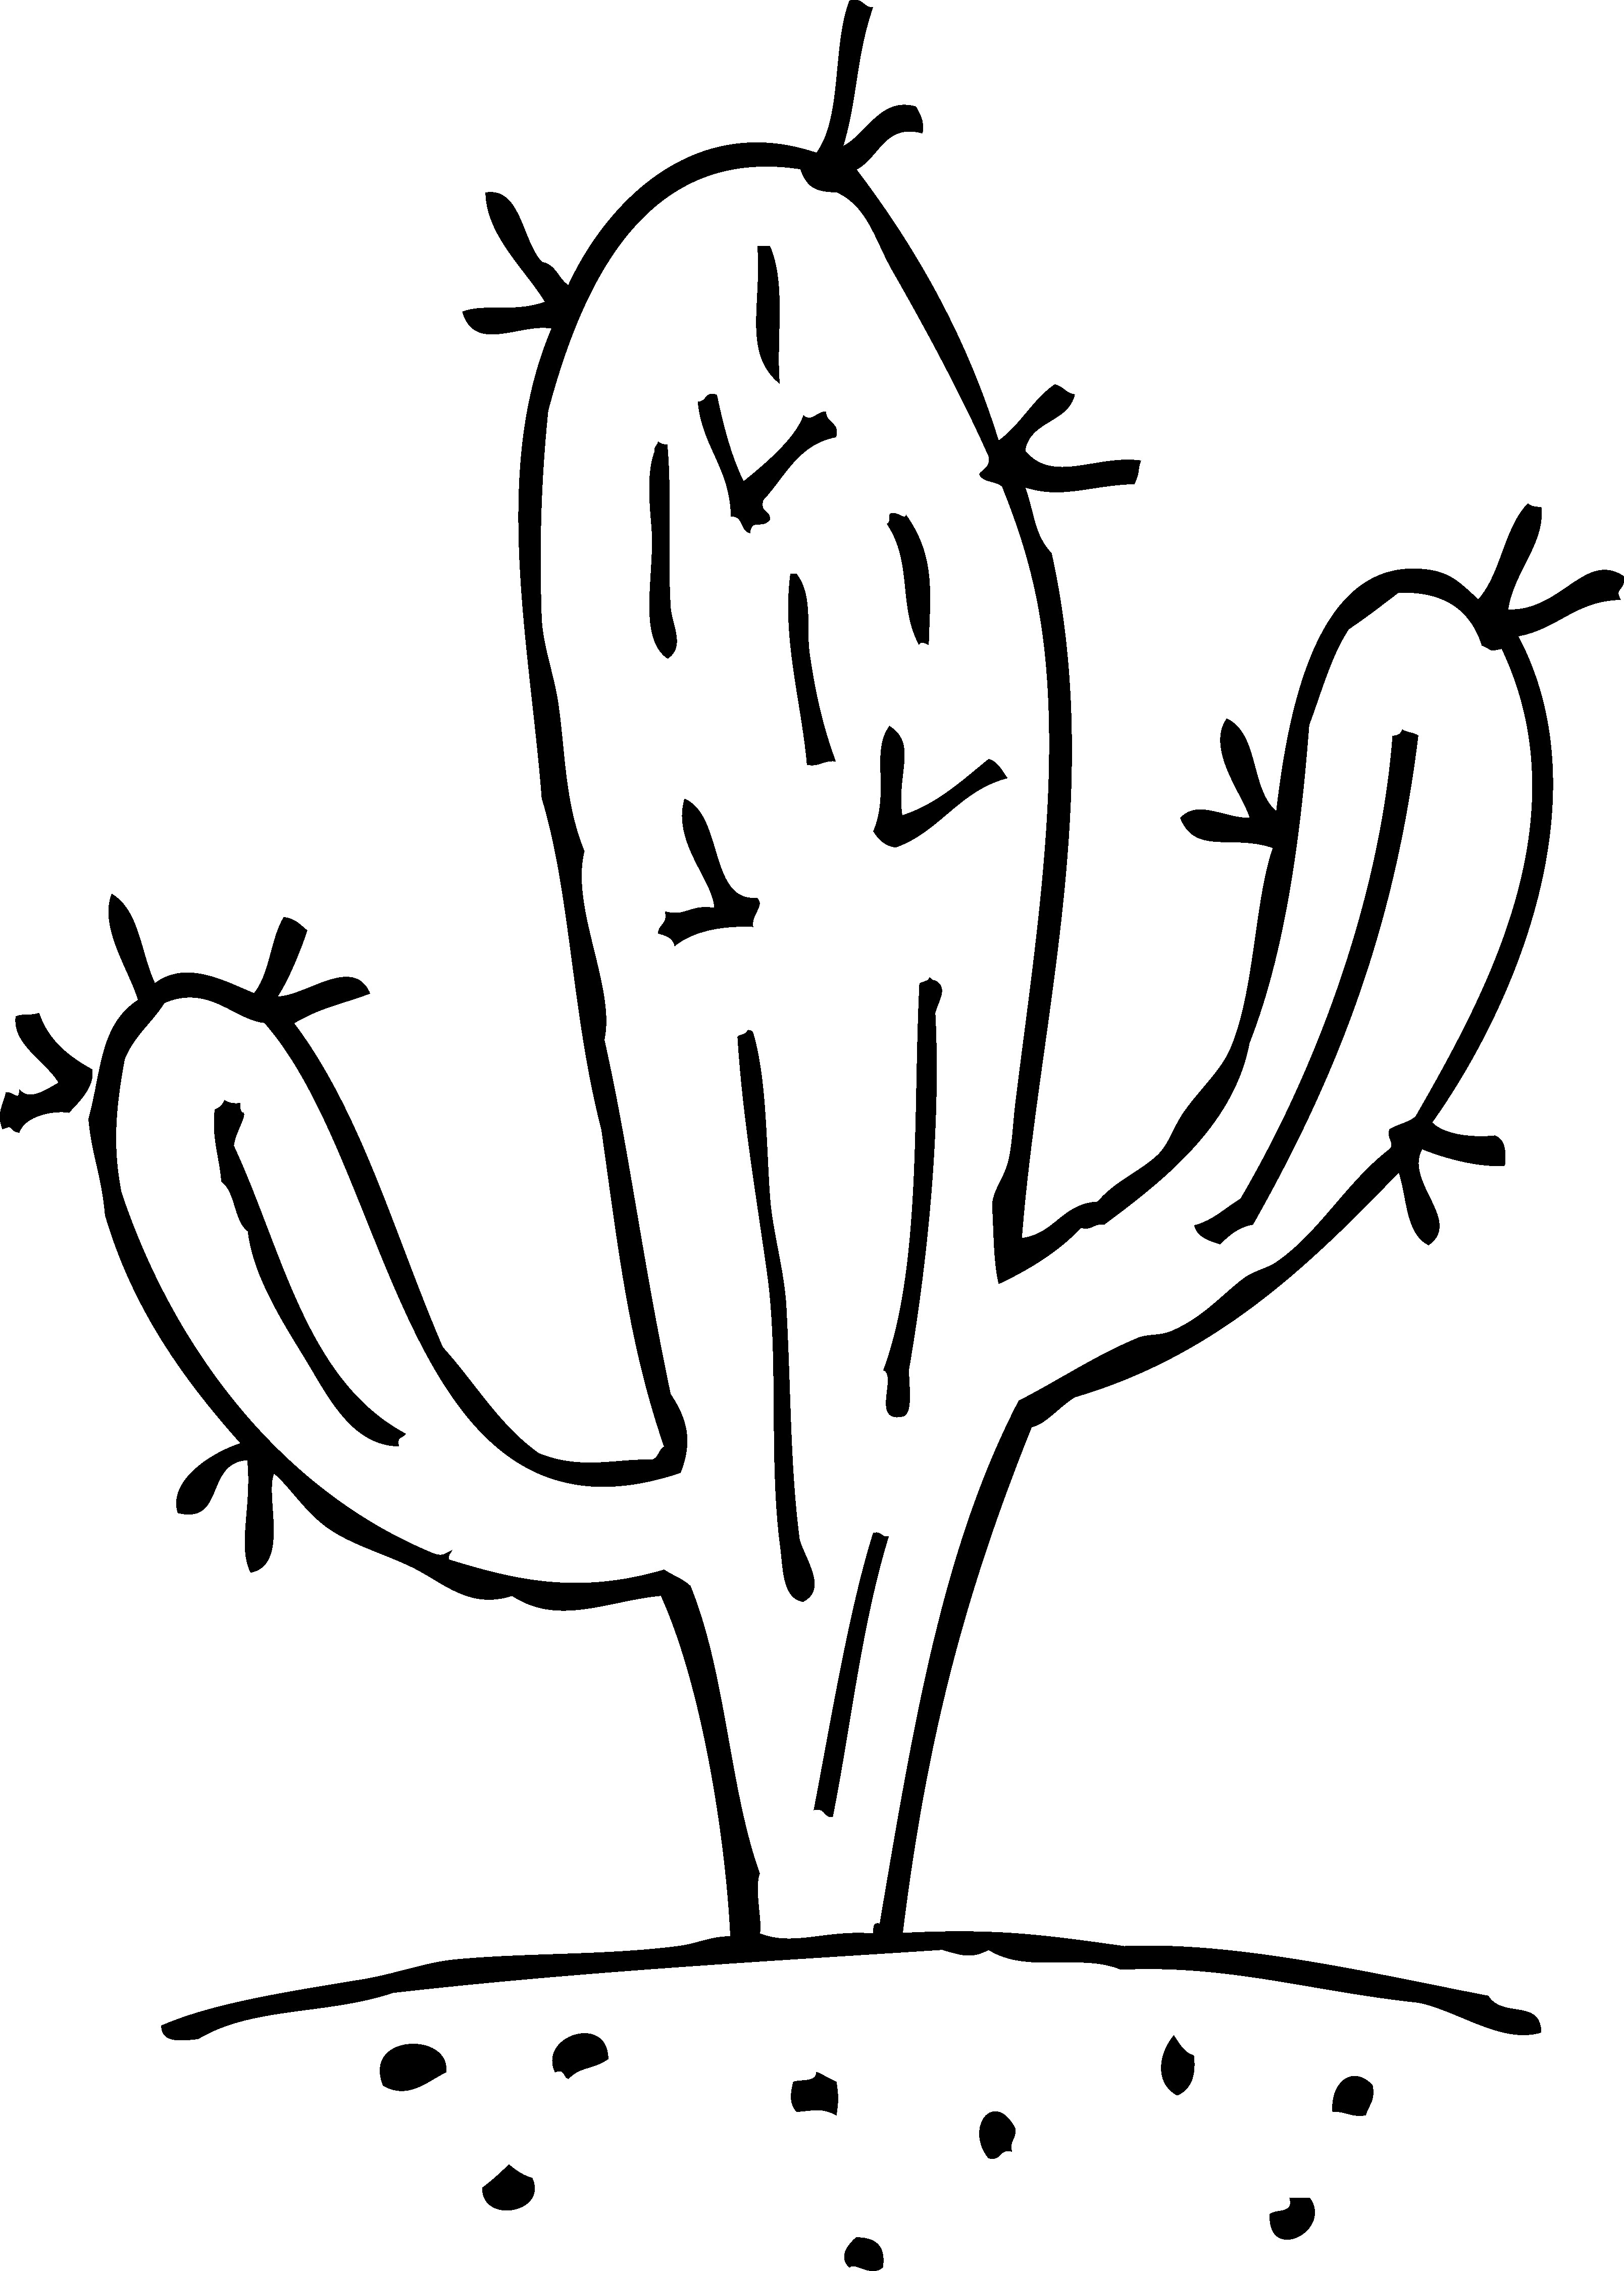 Cactus . Mexico clipart black and white